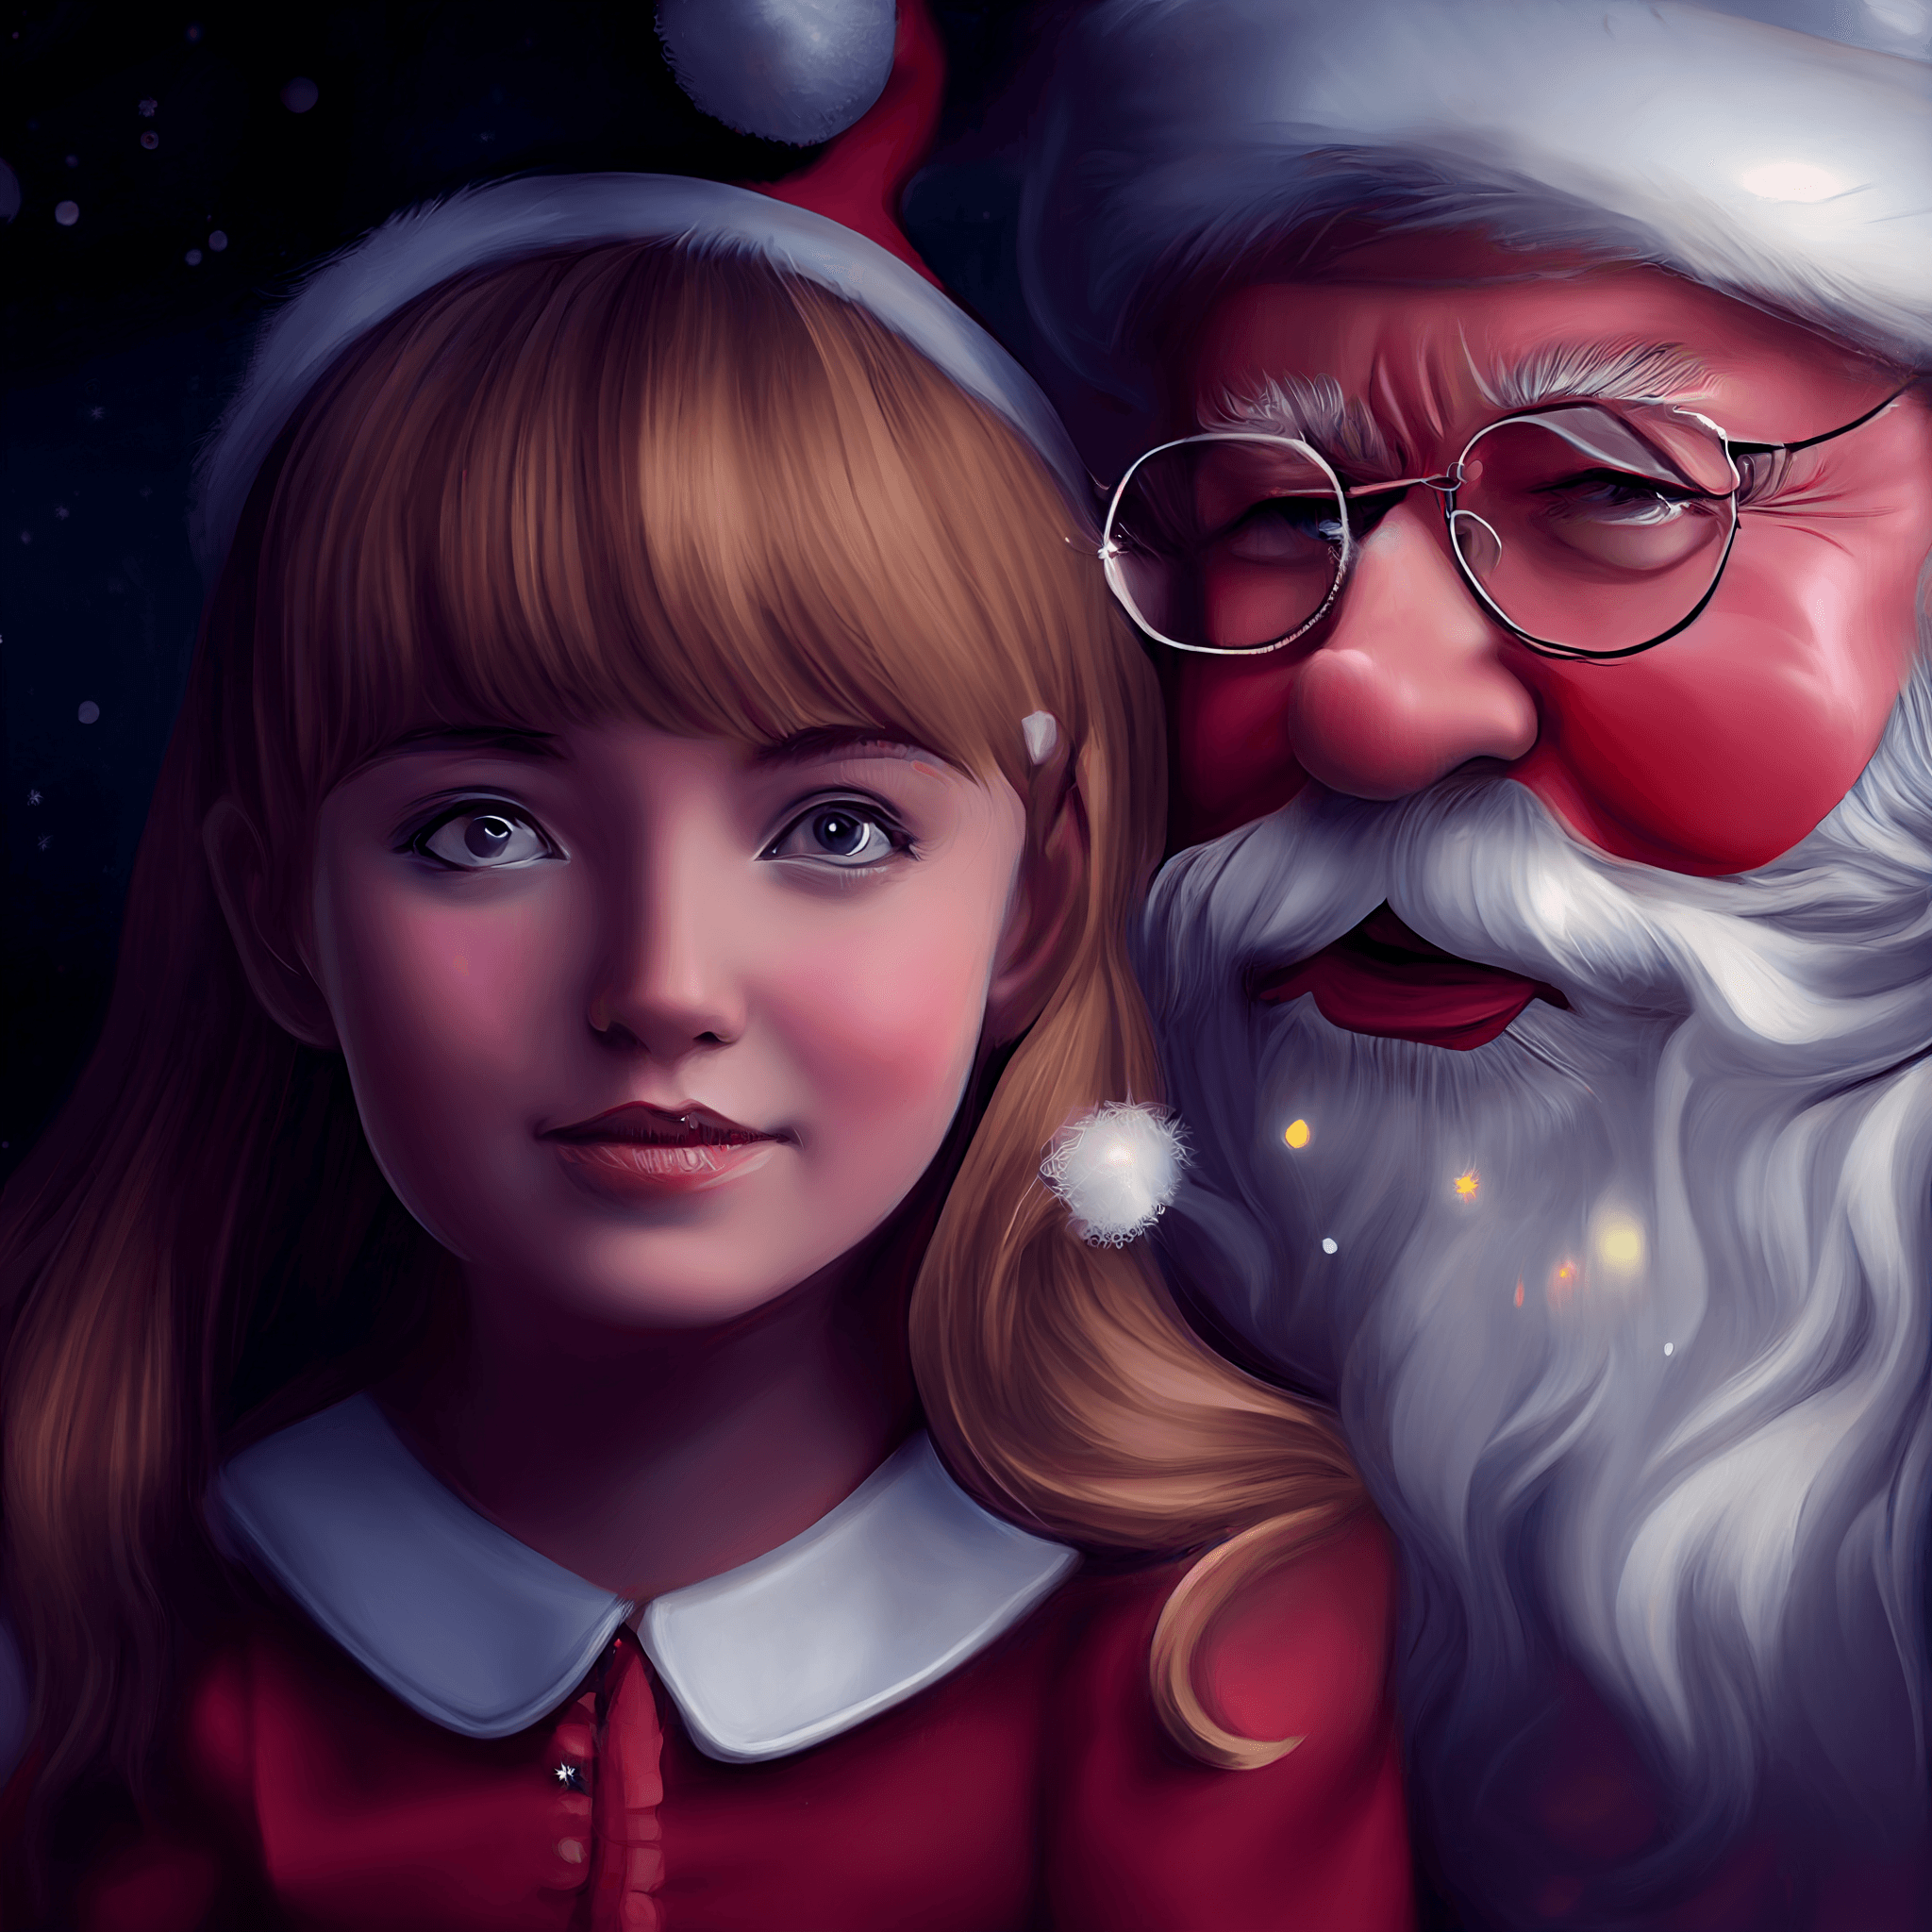 🎅 💃 Cute Baby Girl with Santa Claus 💃 🎅